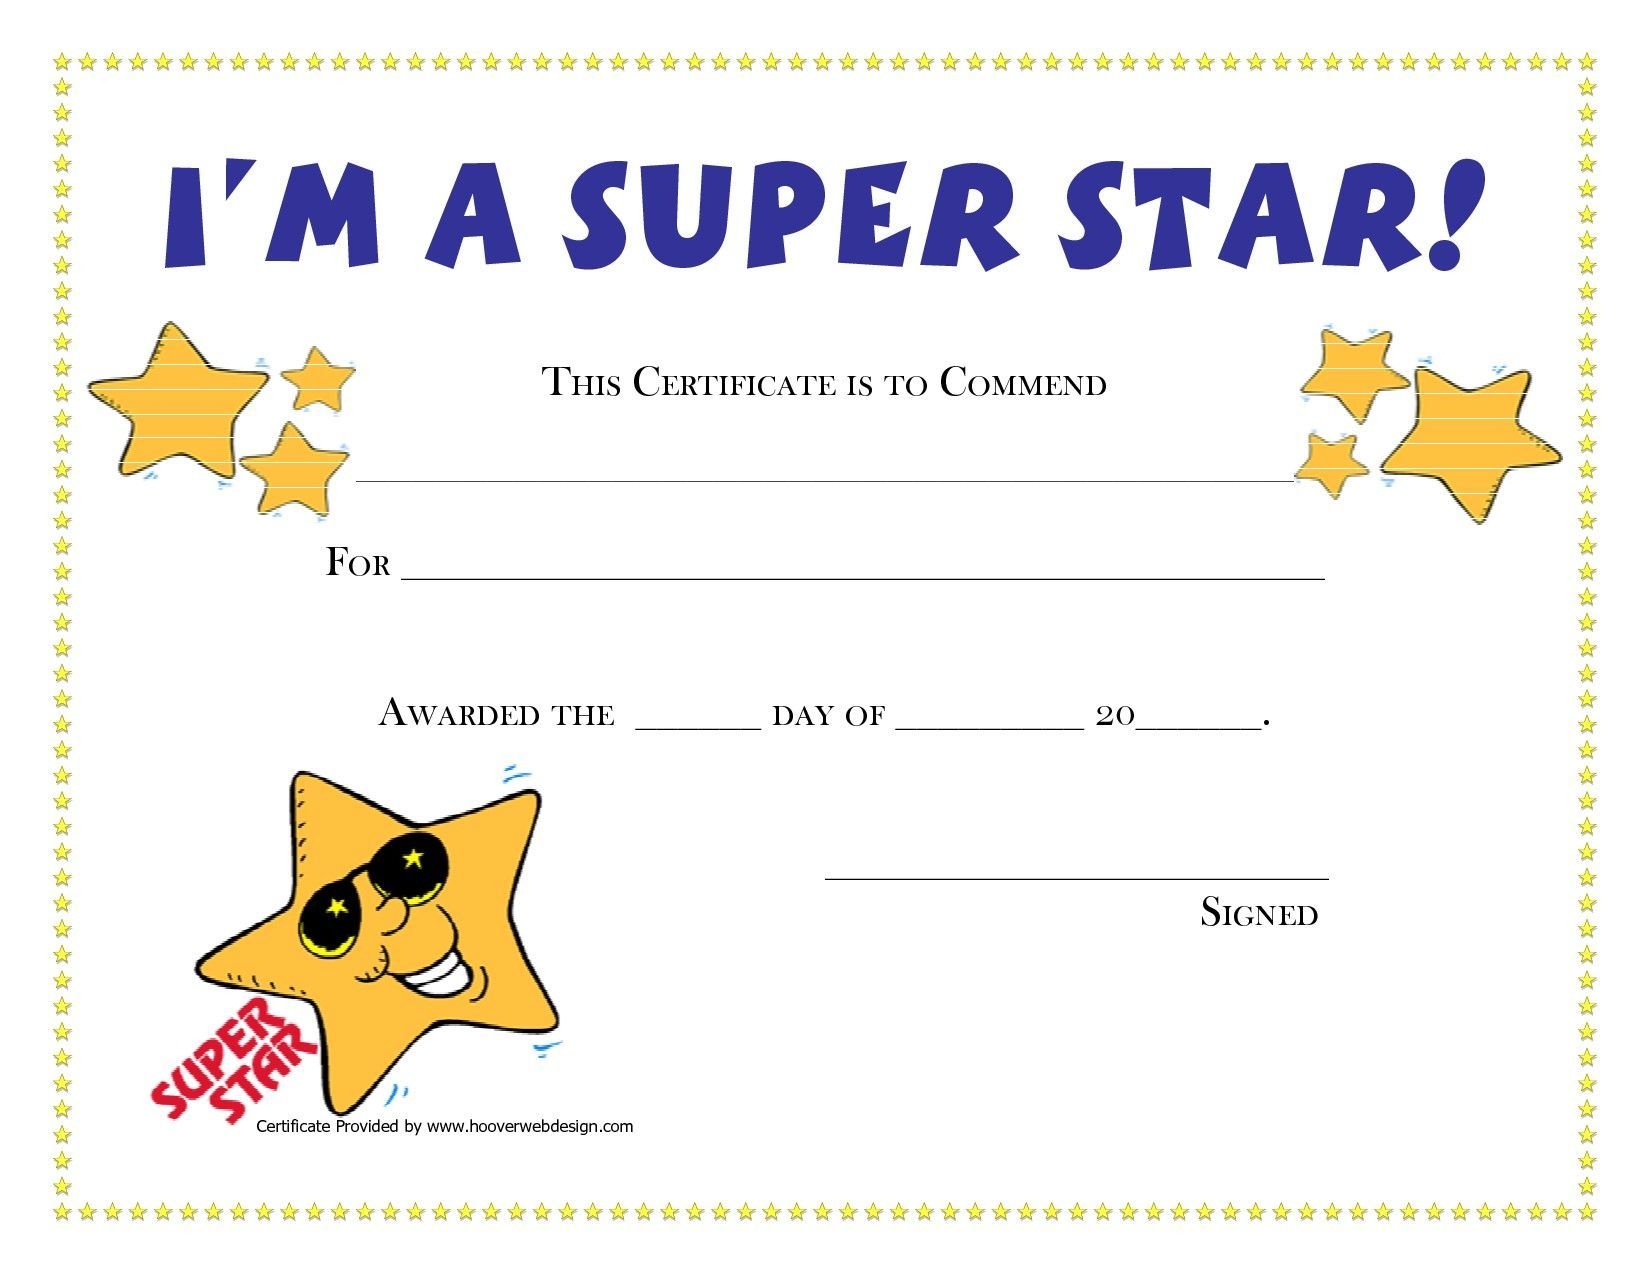 birthday-gift-certificate-for-ms-word-download-at-http